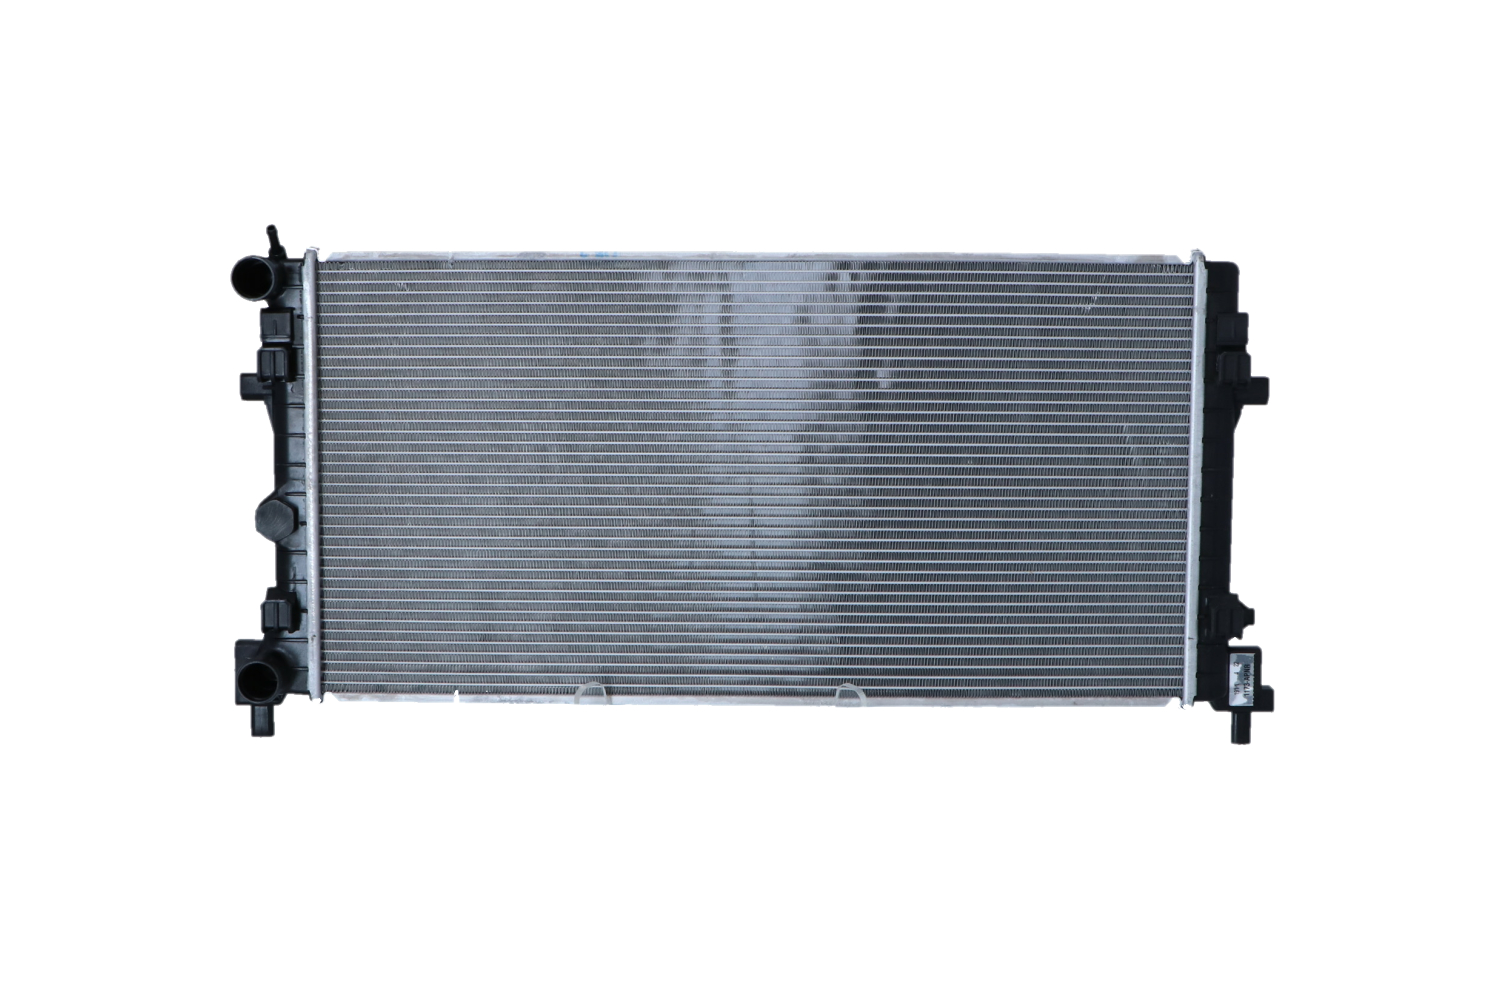 NRF EASY FIT 53024 Engine radiator Aluminium, 650 x 308 x 26 mm, with mounting parts, Brazed cooling fins